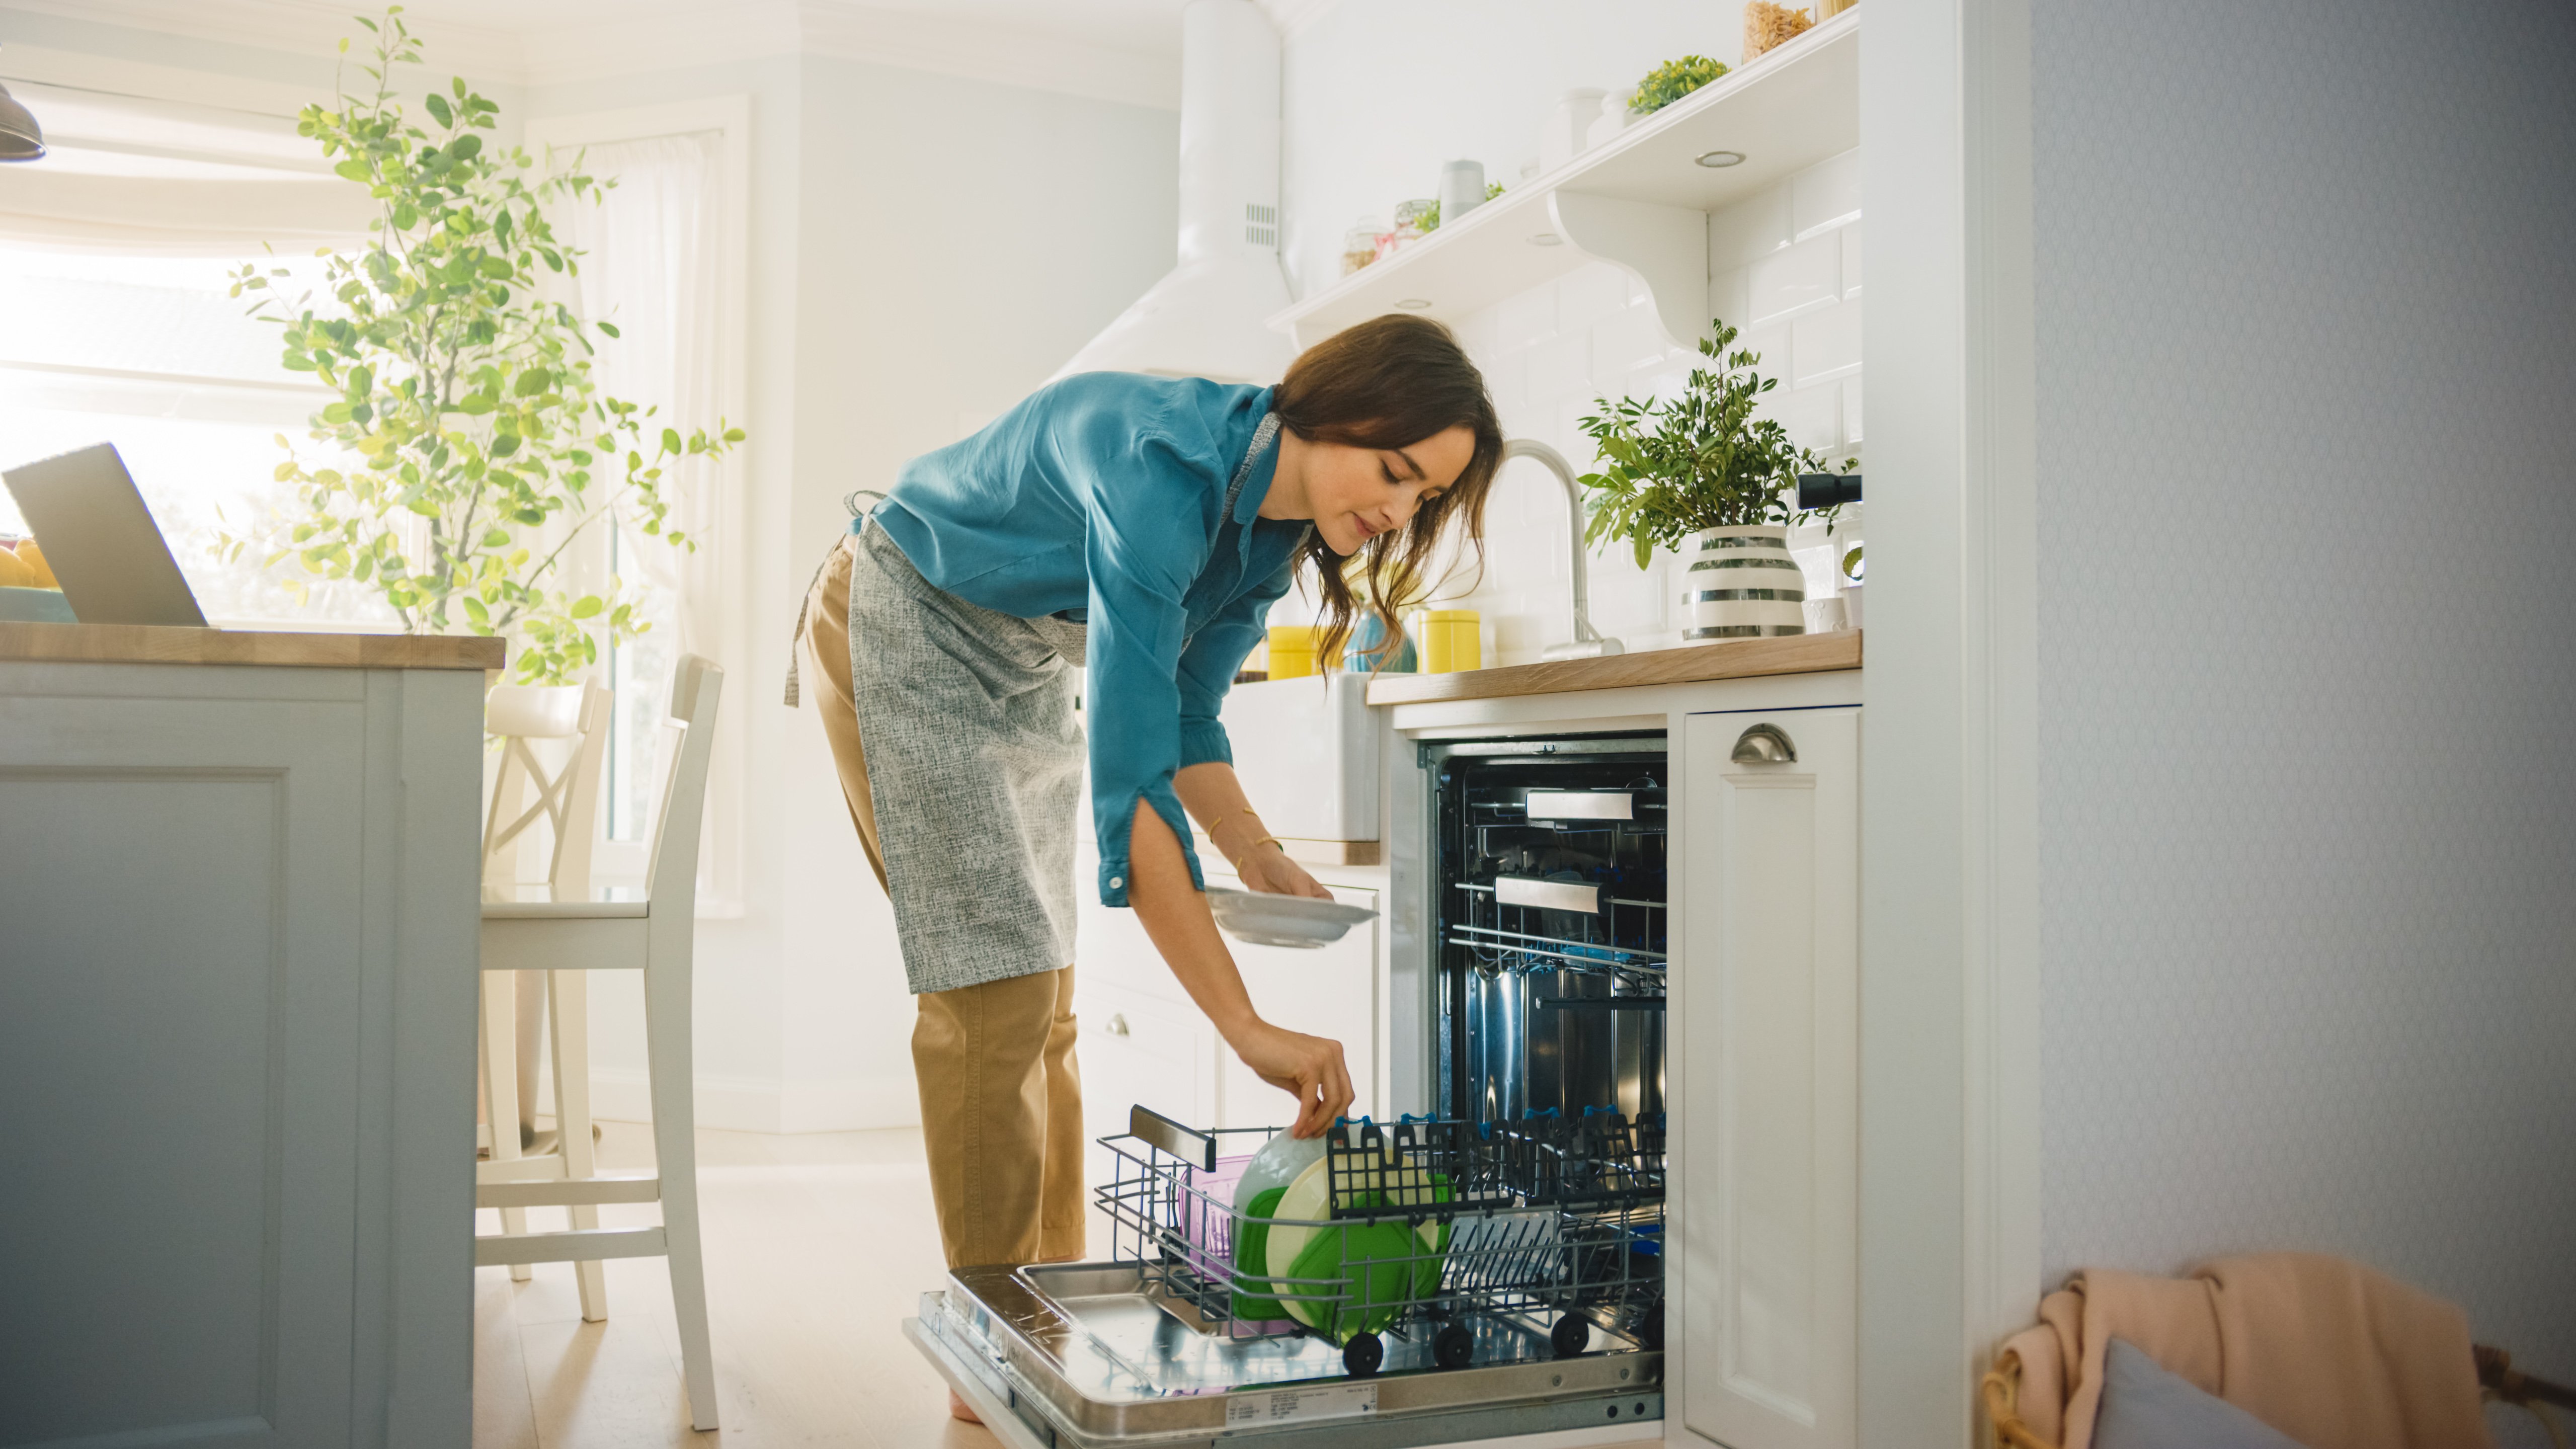 In-depth analysis: Reviewing and rating the best home appliances